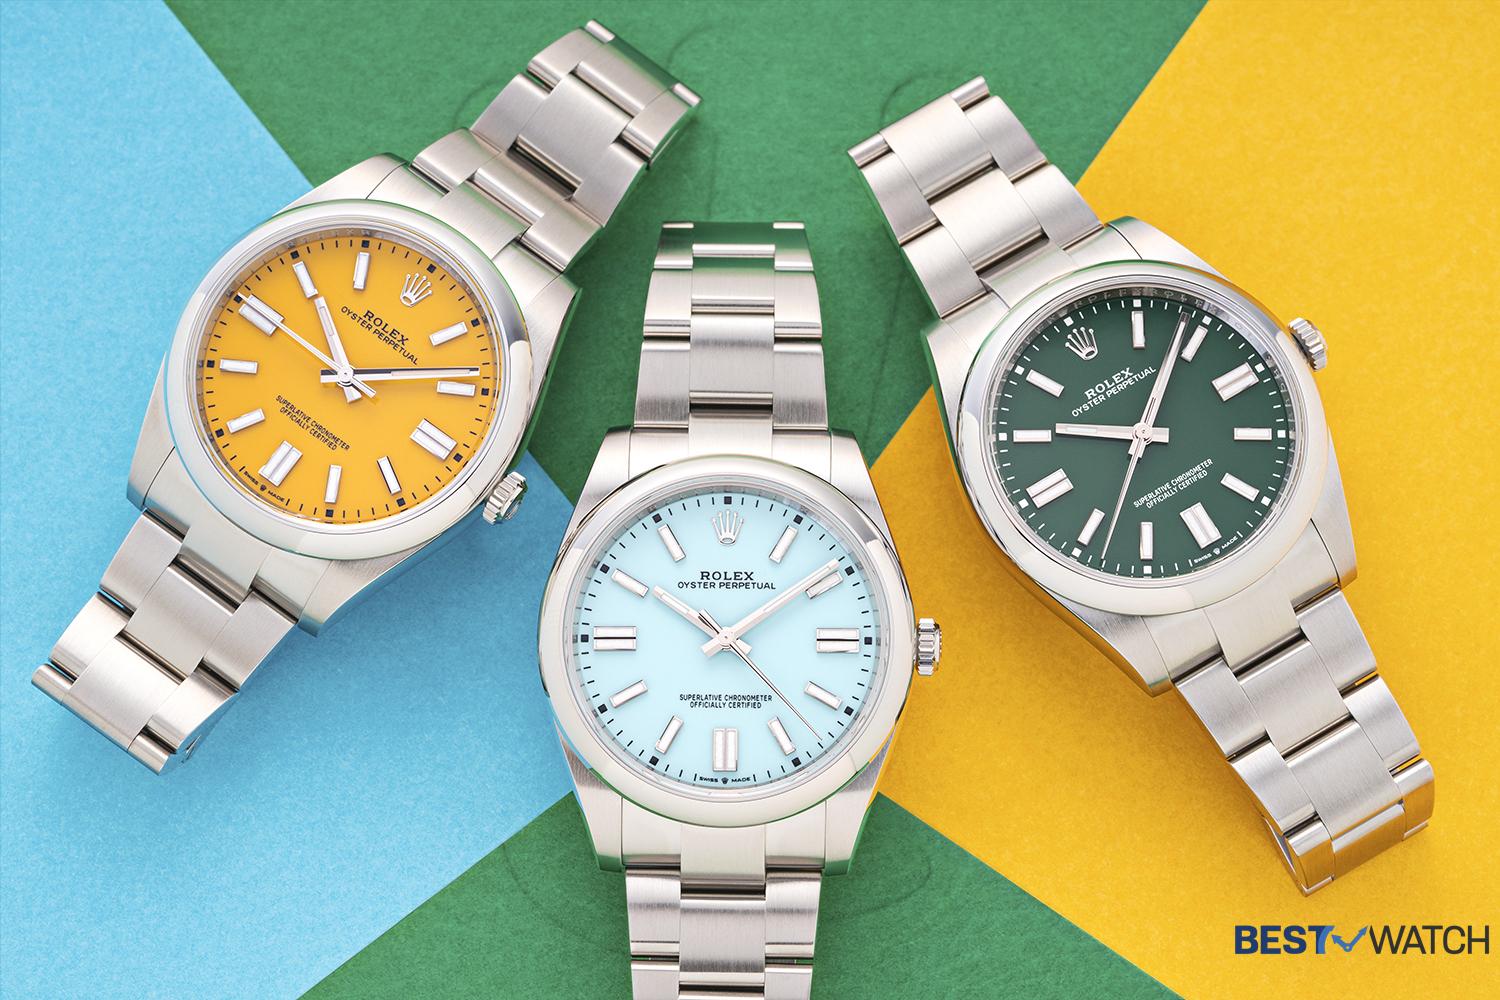 Best 5 Rolex Oyster Perpetual Watches Worth Checking Out - Bestwatch.com.hk